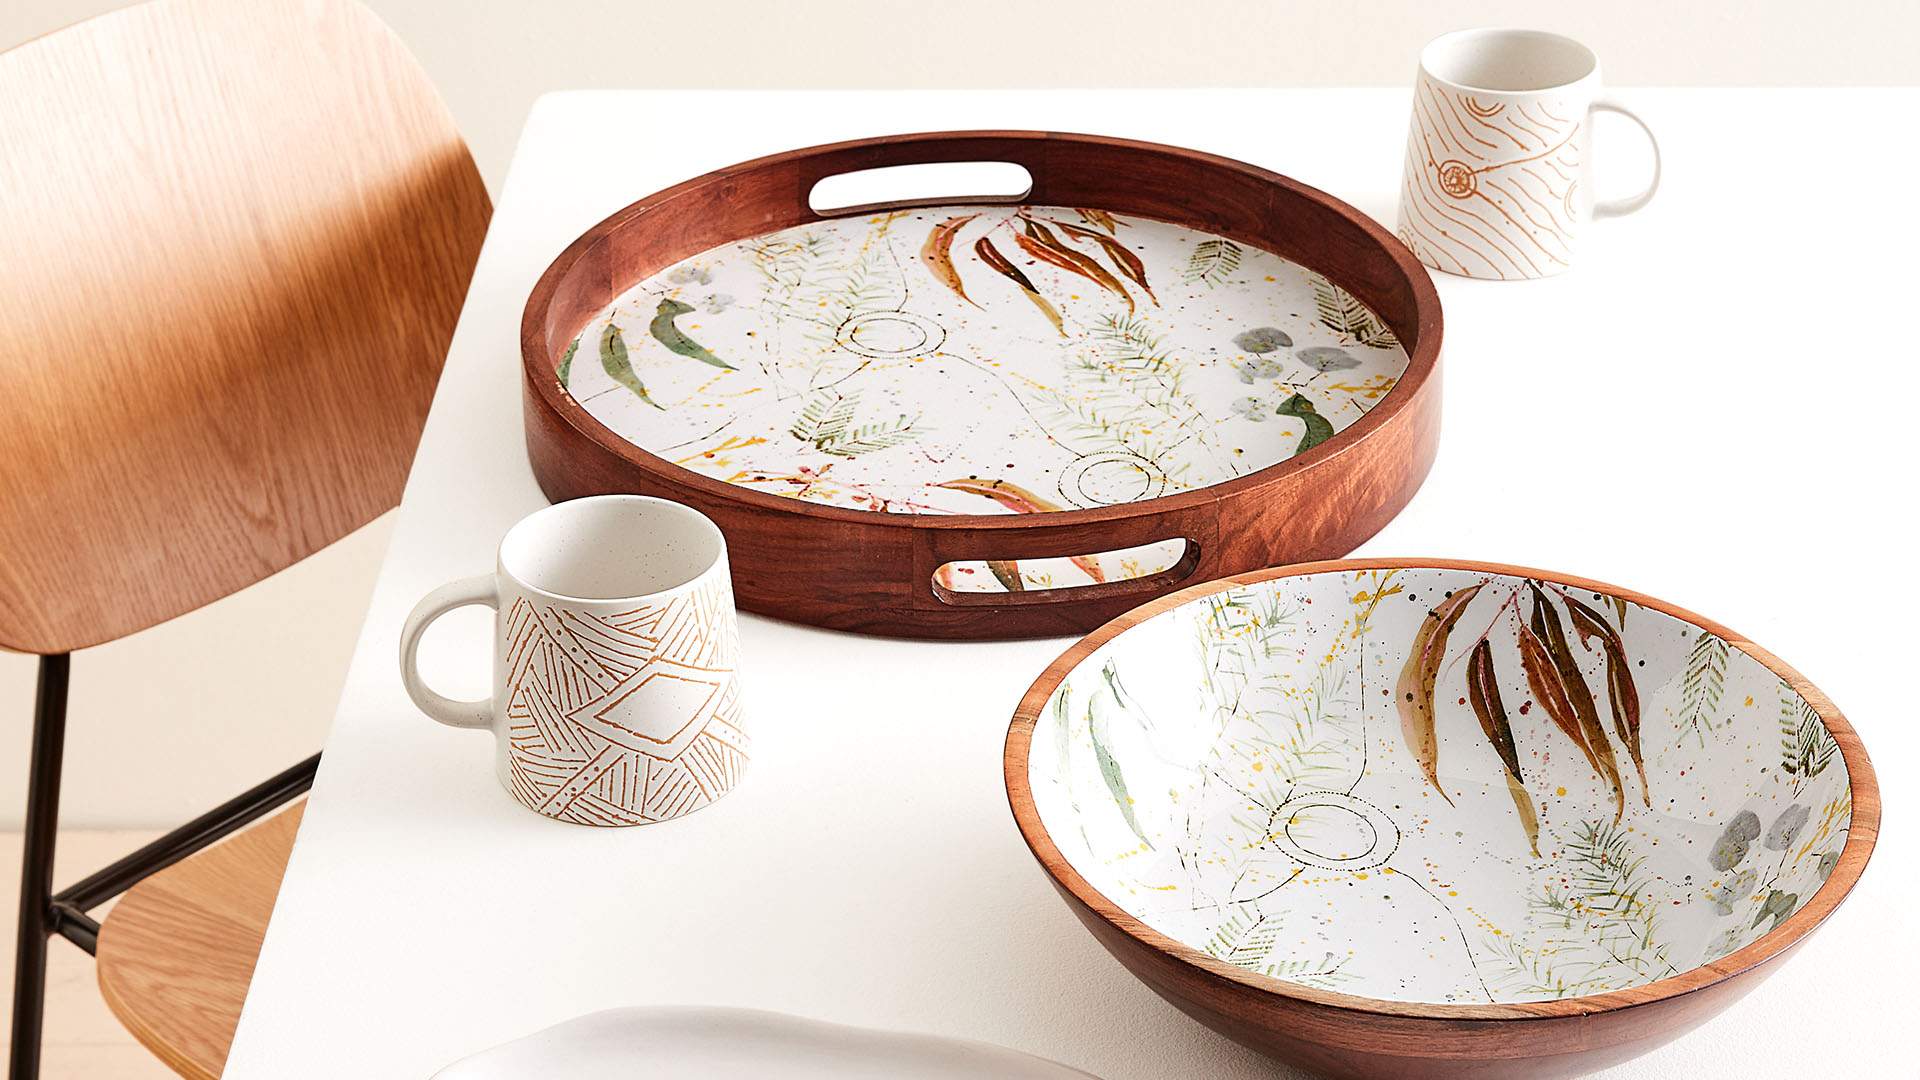 Kmart's Latest Must-Buy Homewares Collection Is a Collaboration with Wiradjuri Artist Judith Young